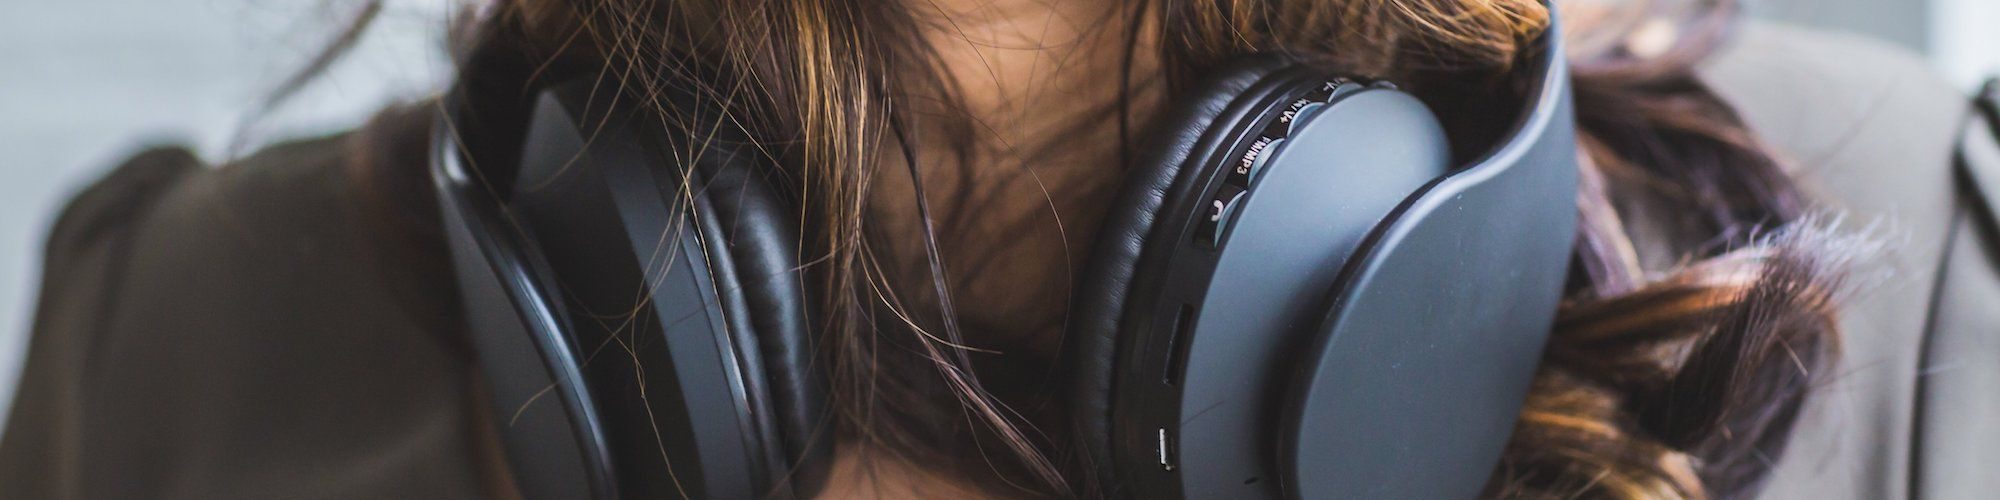 Listen up: how music can boost your productivity